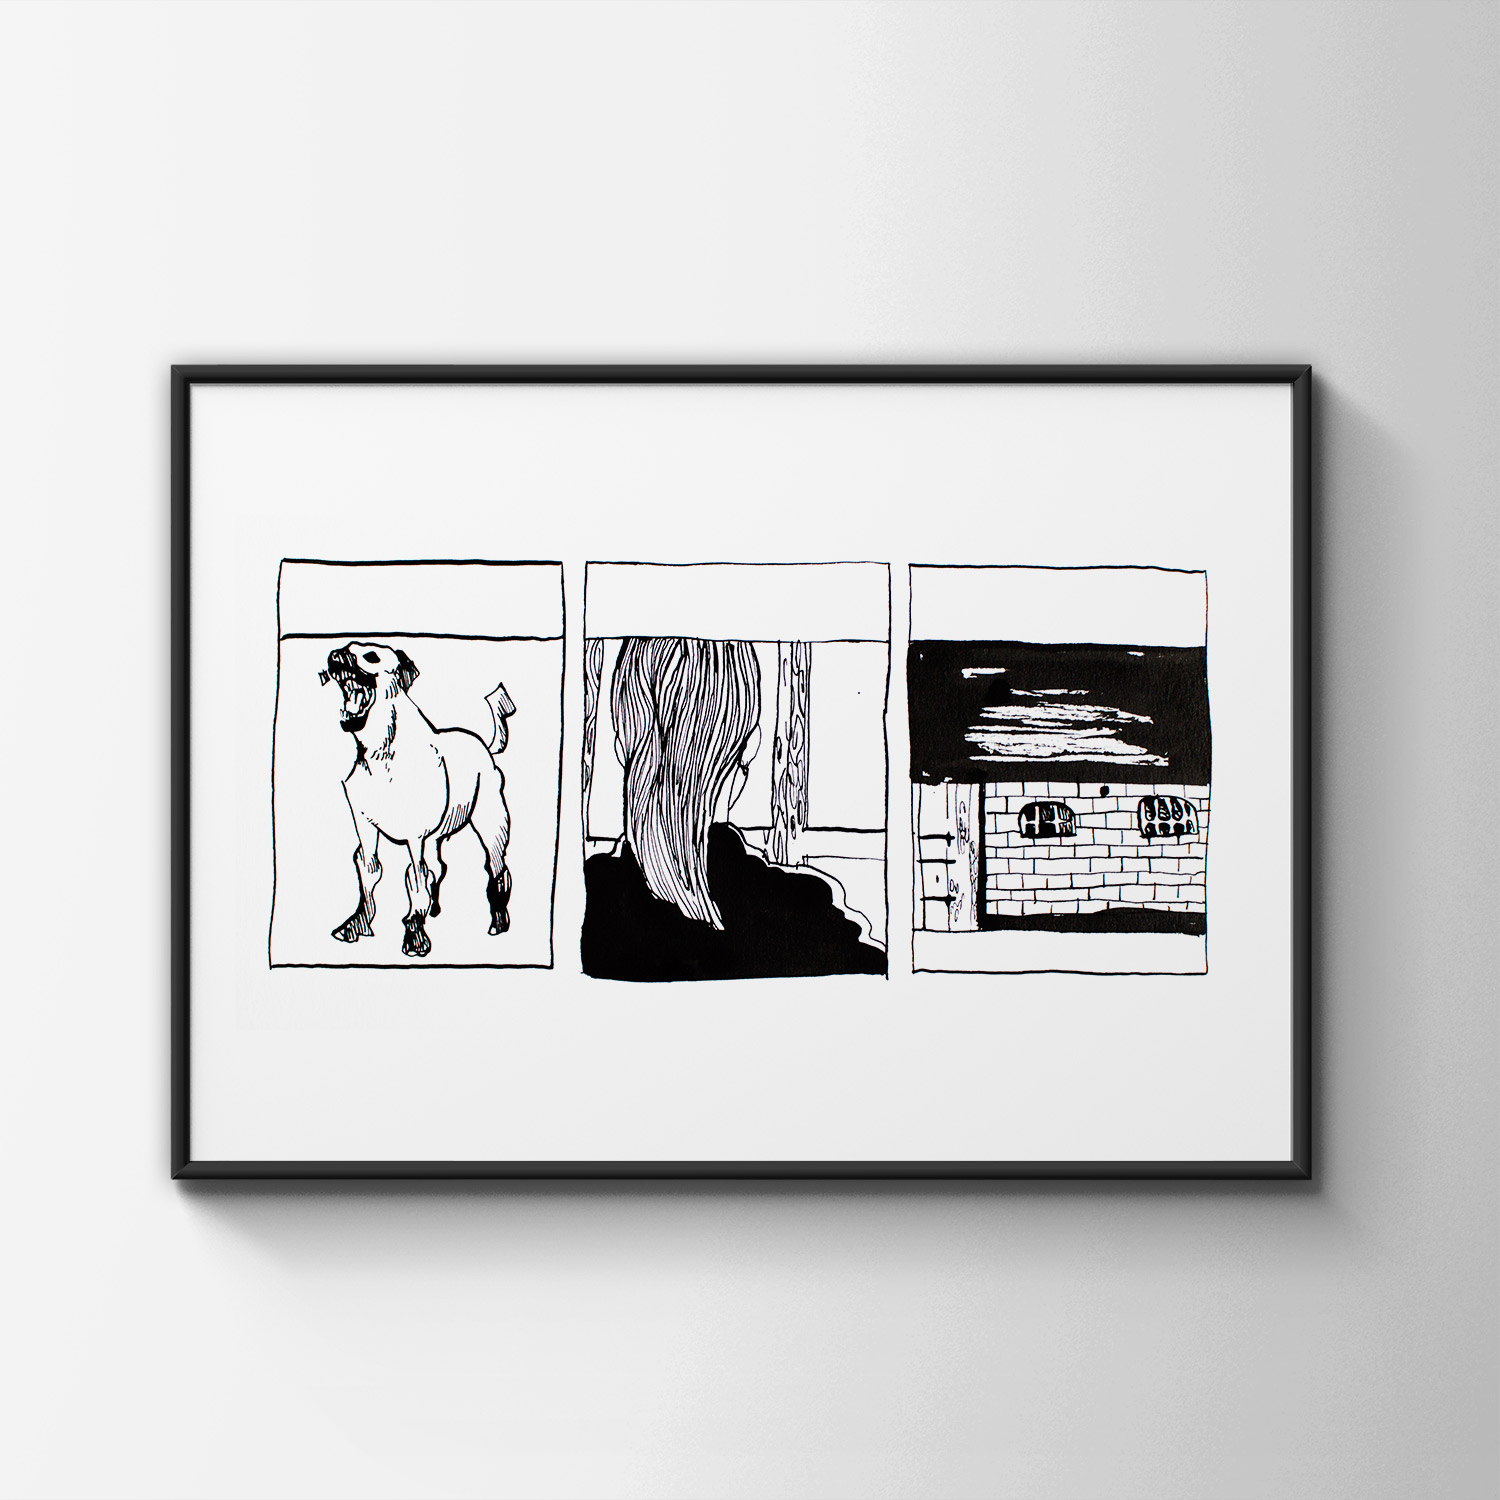 drawings, figurative, illustrative, portraiture, architecture, cartoons, everyday life, pets, black, white, ink, paper, black-and-white, buildings, contemporary-art, dogs, modern, modern-art, sketch, Buy original high quality art. Paintings, drawings, limited edition prints & posters by talented artists.